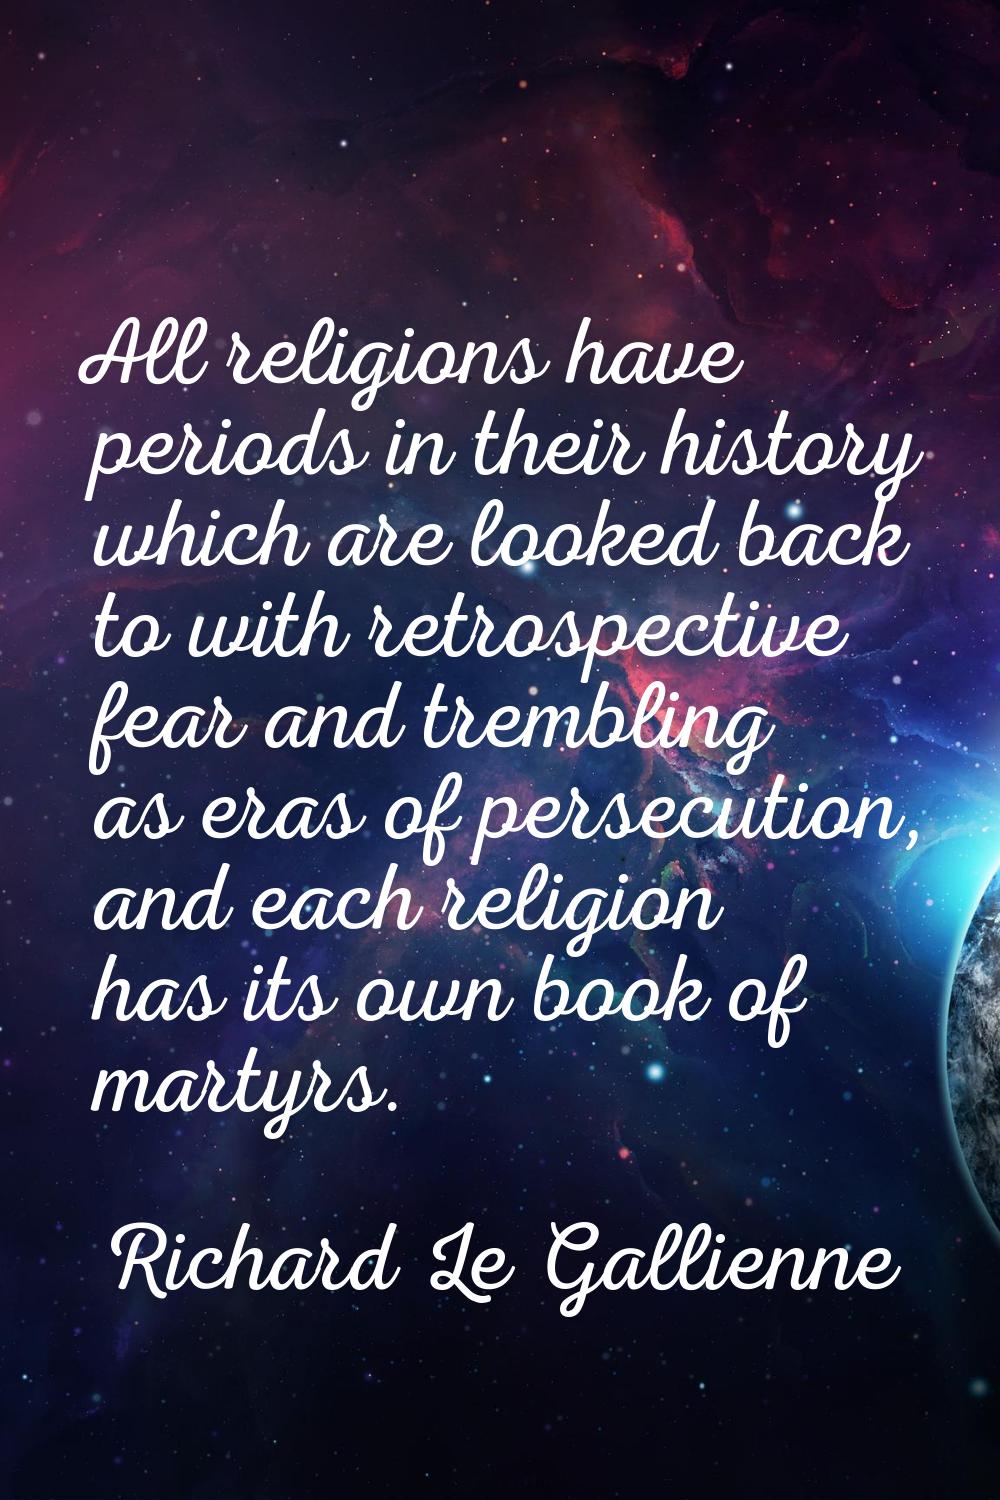 All religions have periods in their history which are looked back to with retrospective fear and tr